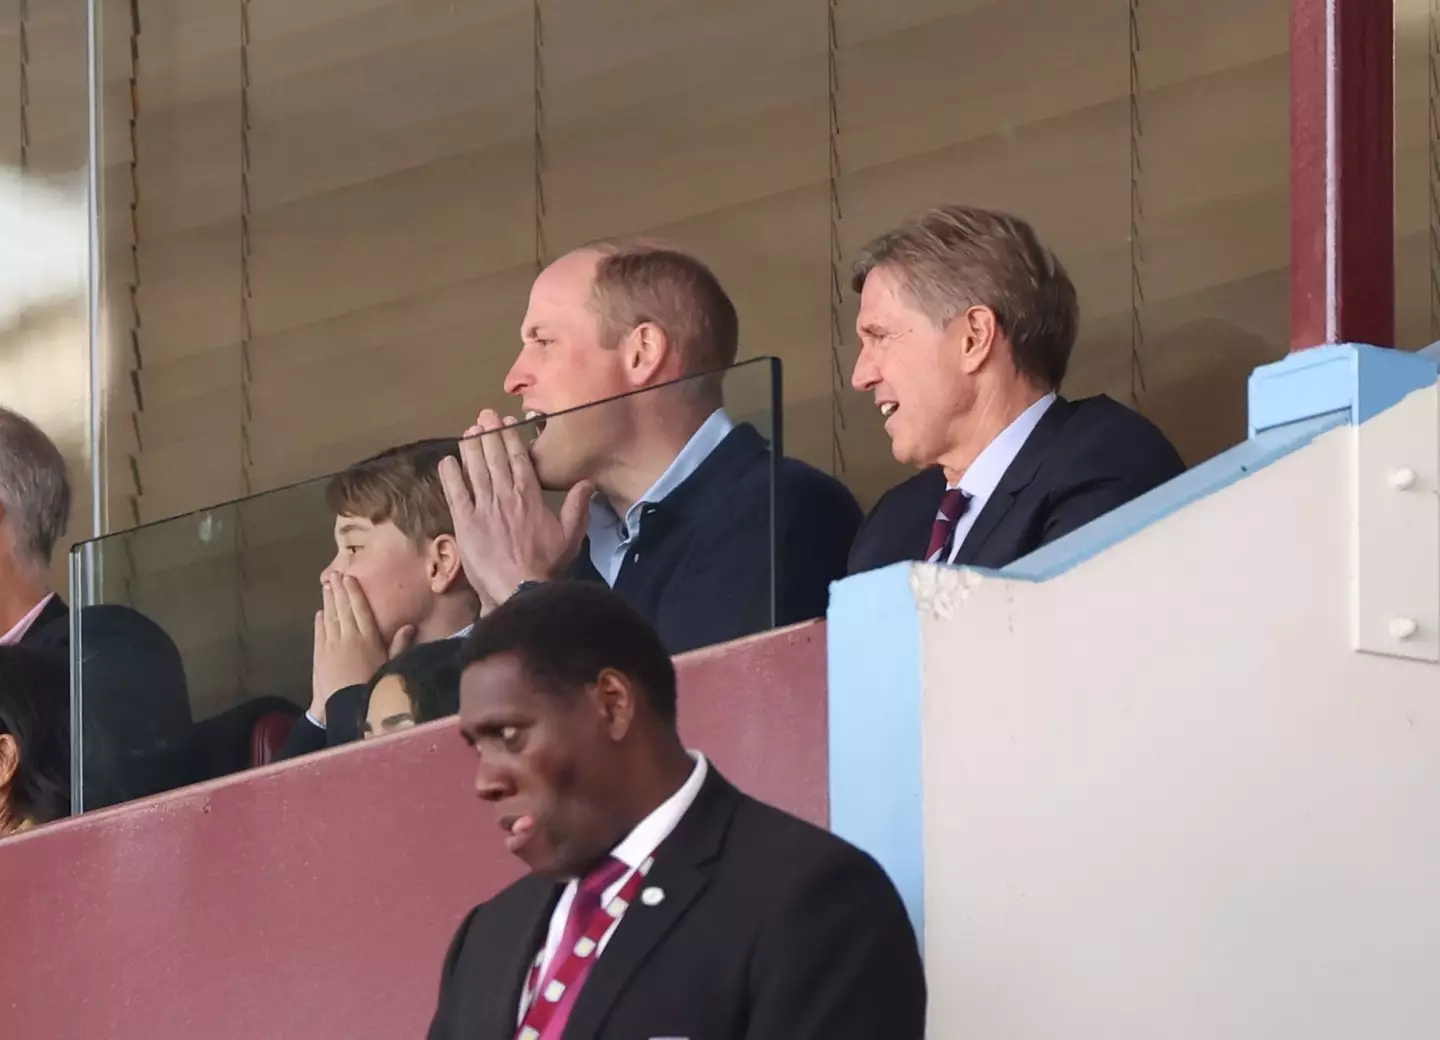 Prince William was seen over the weekend supporting Aston Villa with son, Prince George.